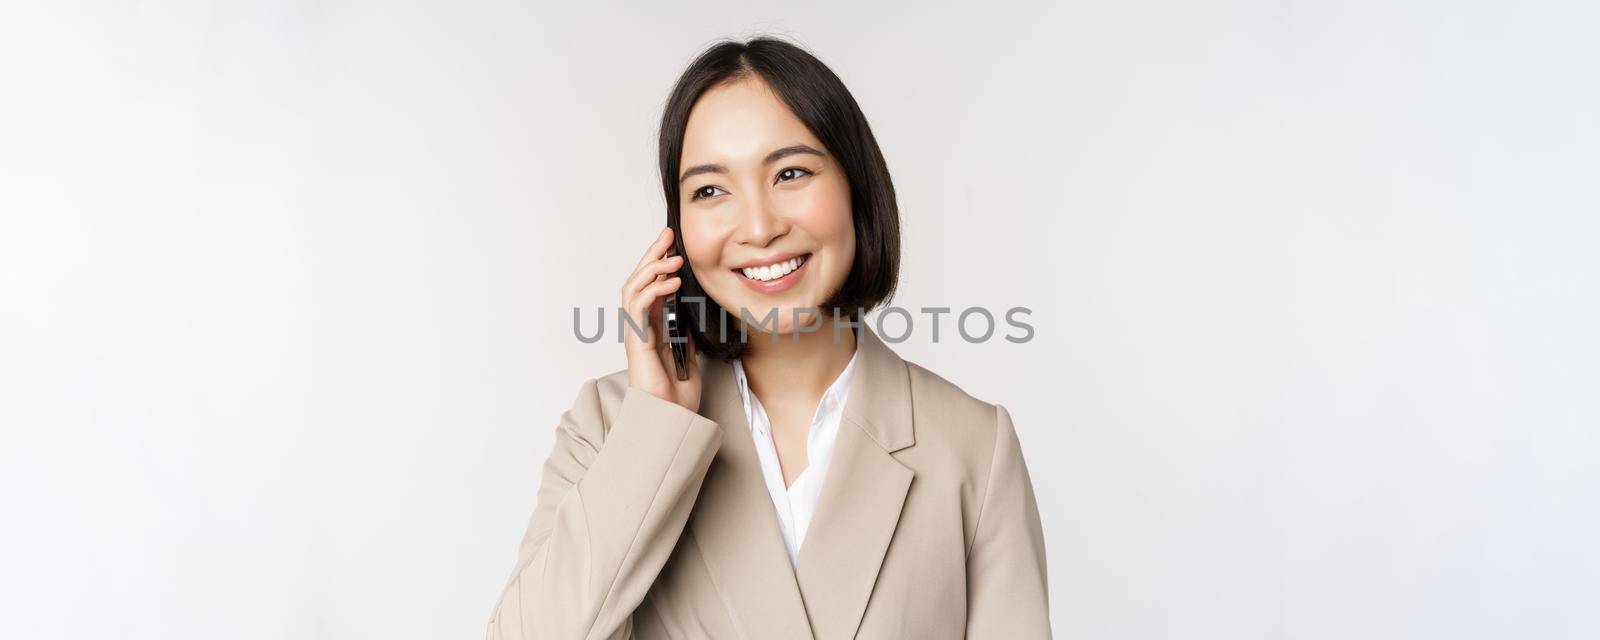 Smiling corporate woman in suit, talking on mobile phone, having a business call on smartphone, standing over white background by Benzoix